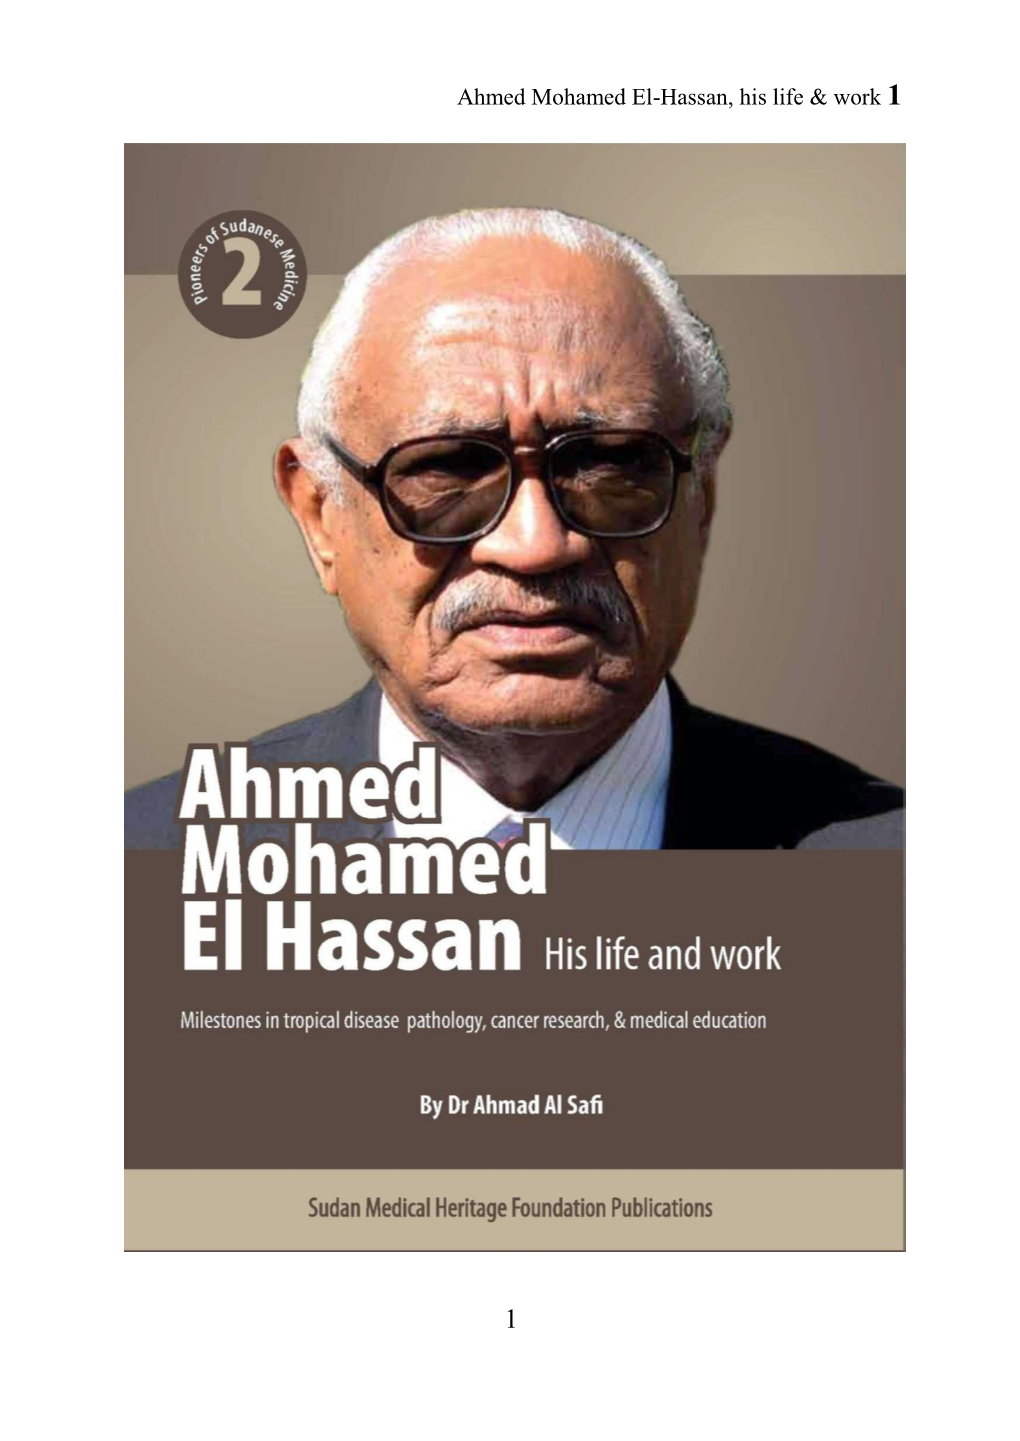 Ahmed Mohamed El-Hassan, His Life and Work